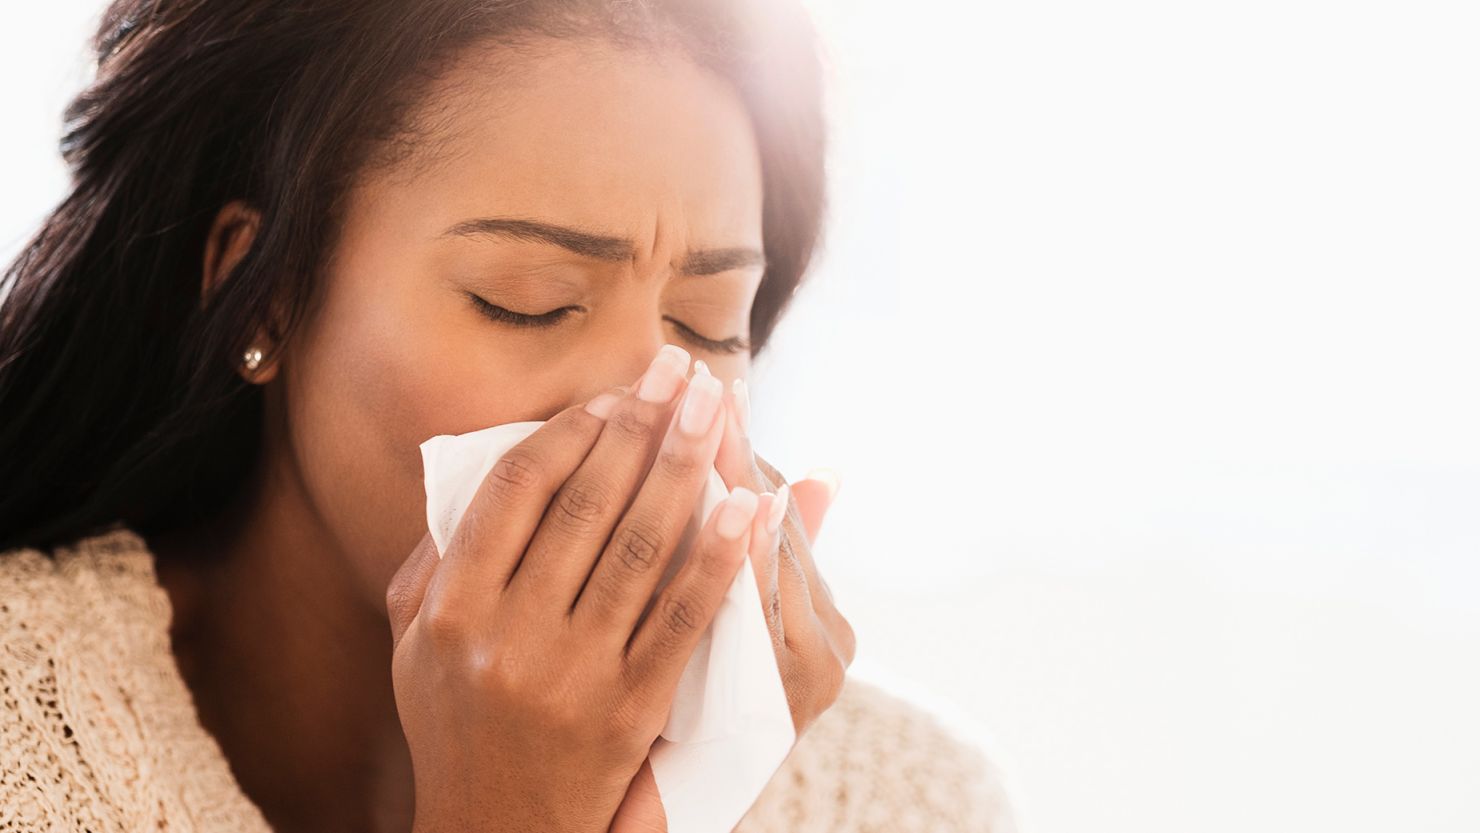 Symptoms from colds can persist for weeks after the infection, a new study showed.